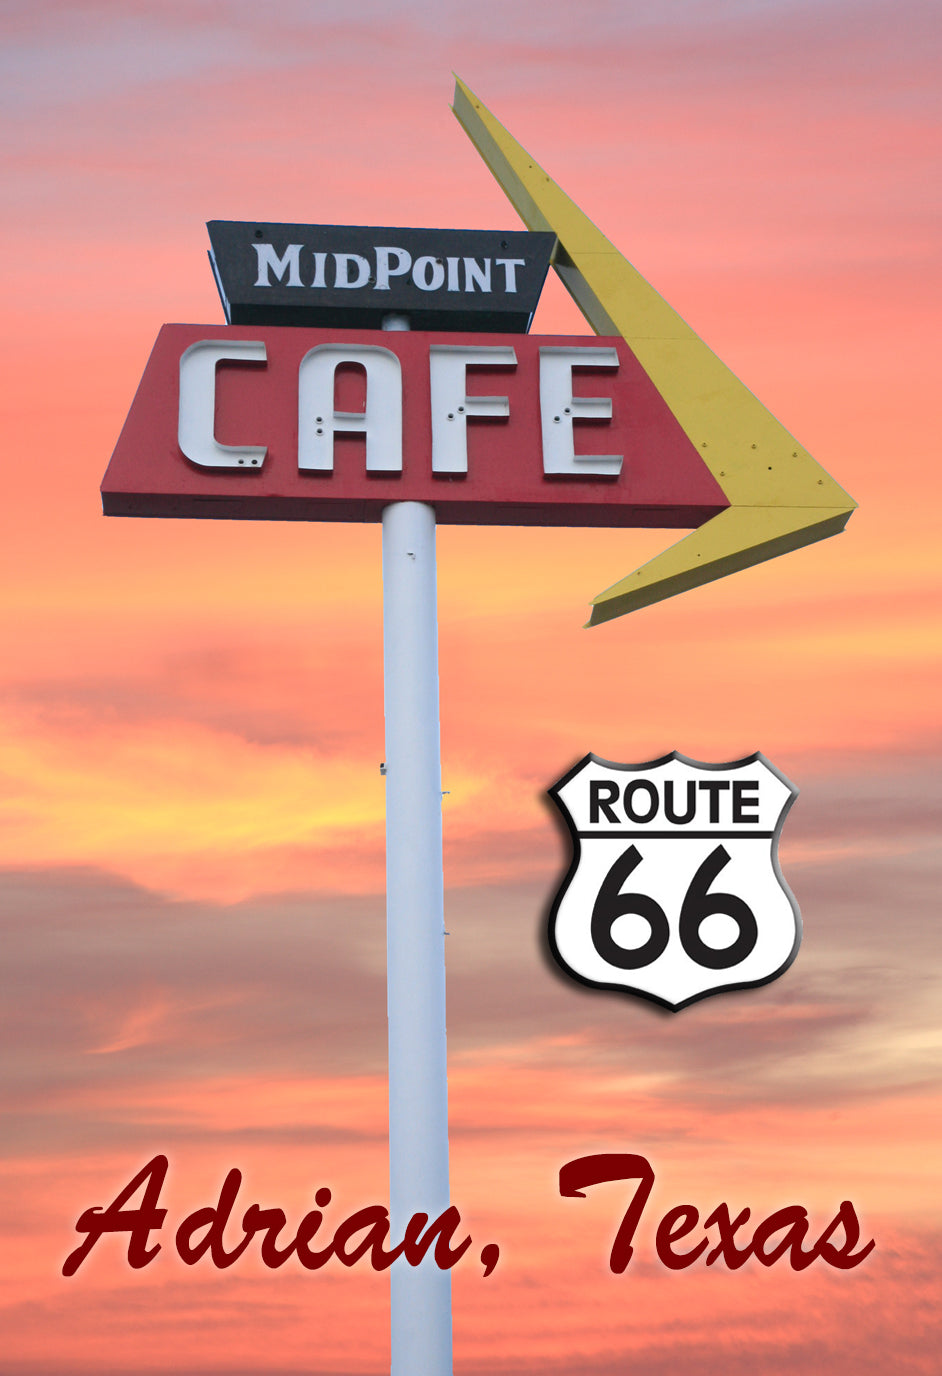 Route 66, Route 66 Magnet, Midpoint cafe, Route 66 Collectible,